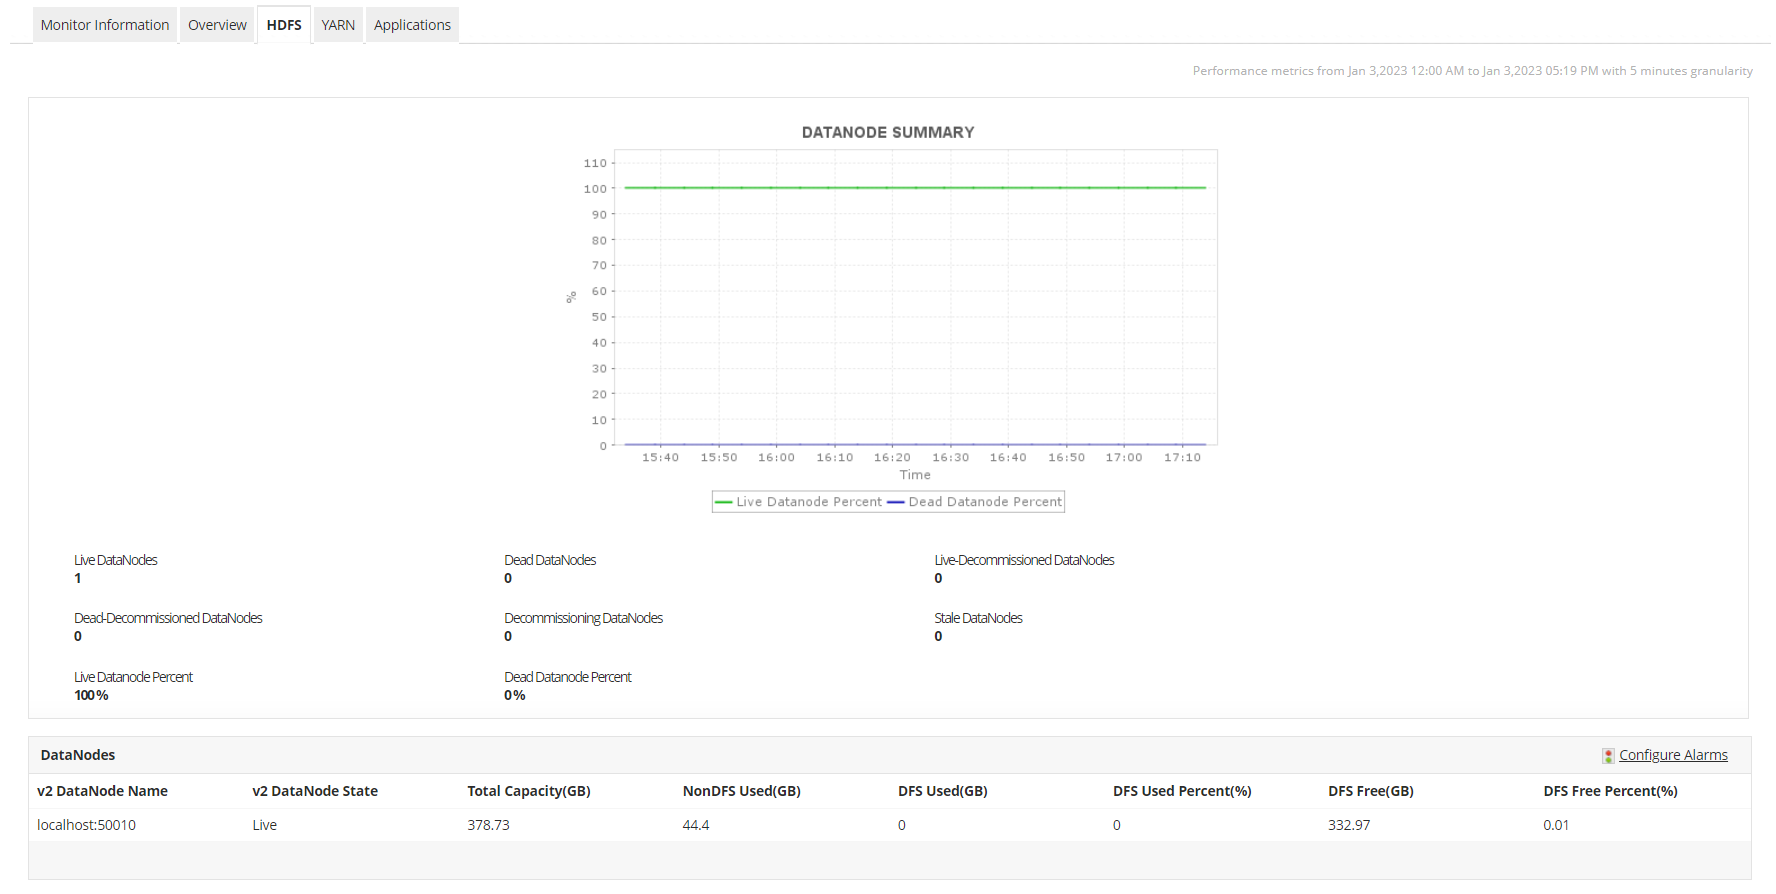 Monitor performance of your Hadoop clusters